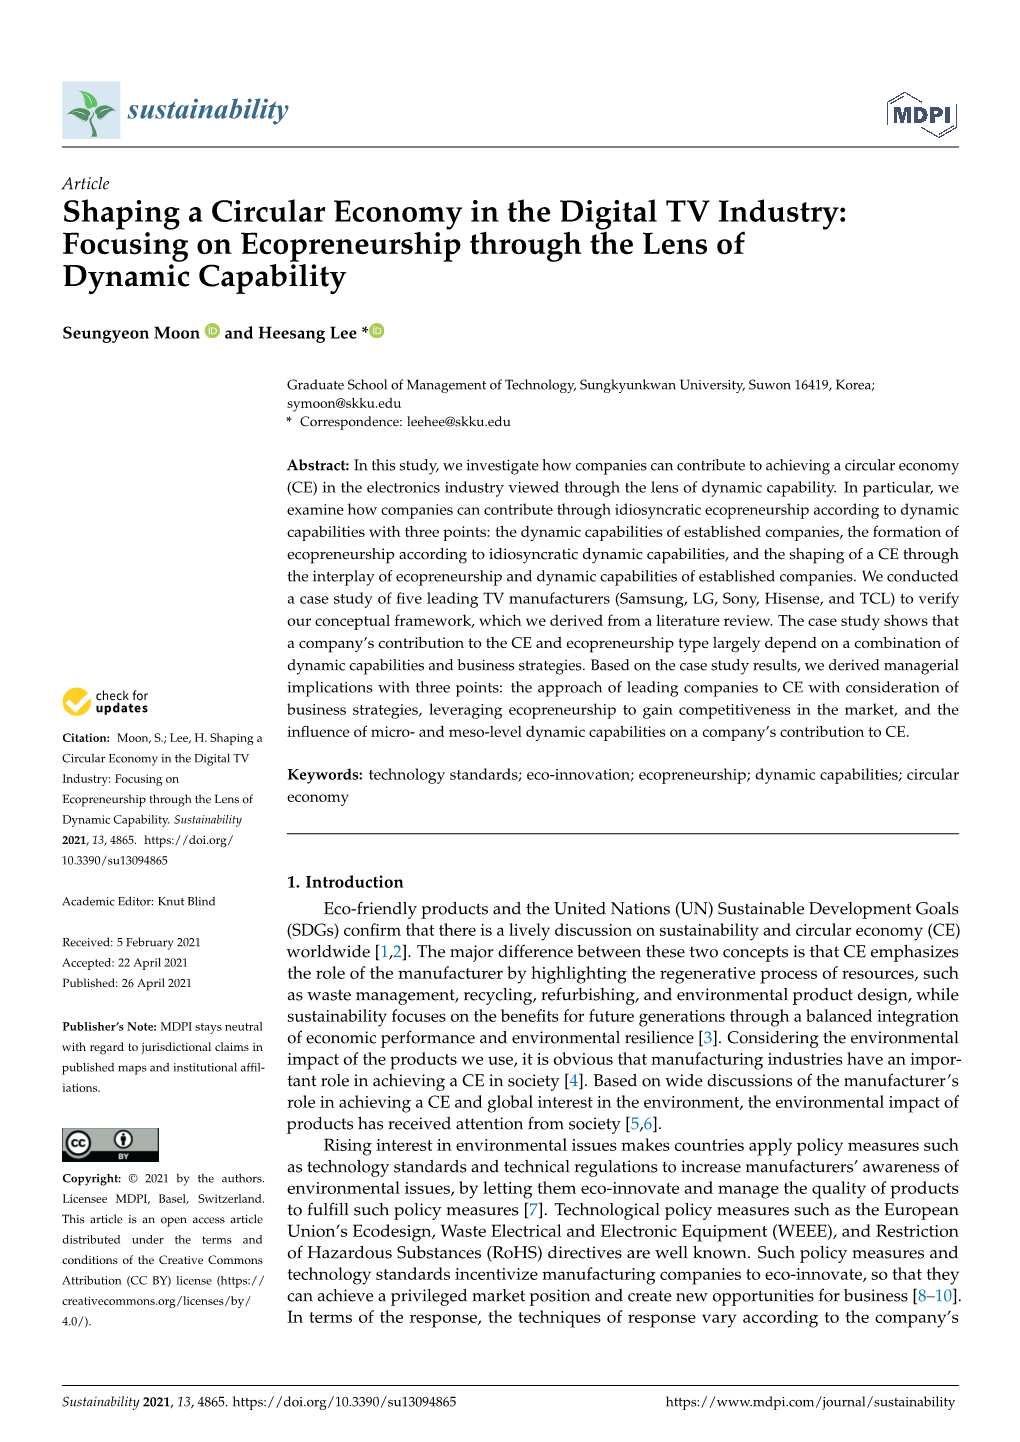 Shaping a Circular Economy in the Digital TV Industry: Focusing on Ecopreneurship Through the Lens of Dynamic Capability